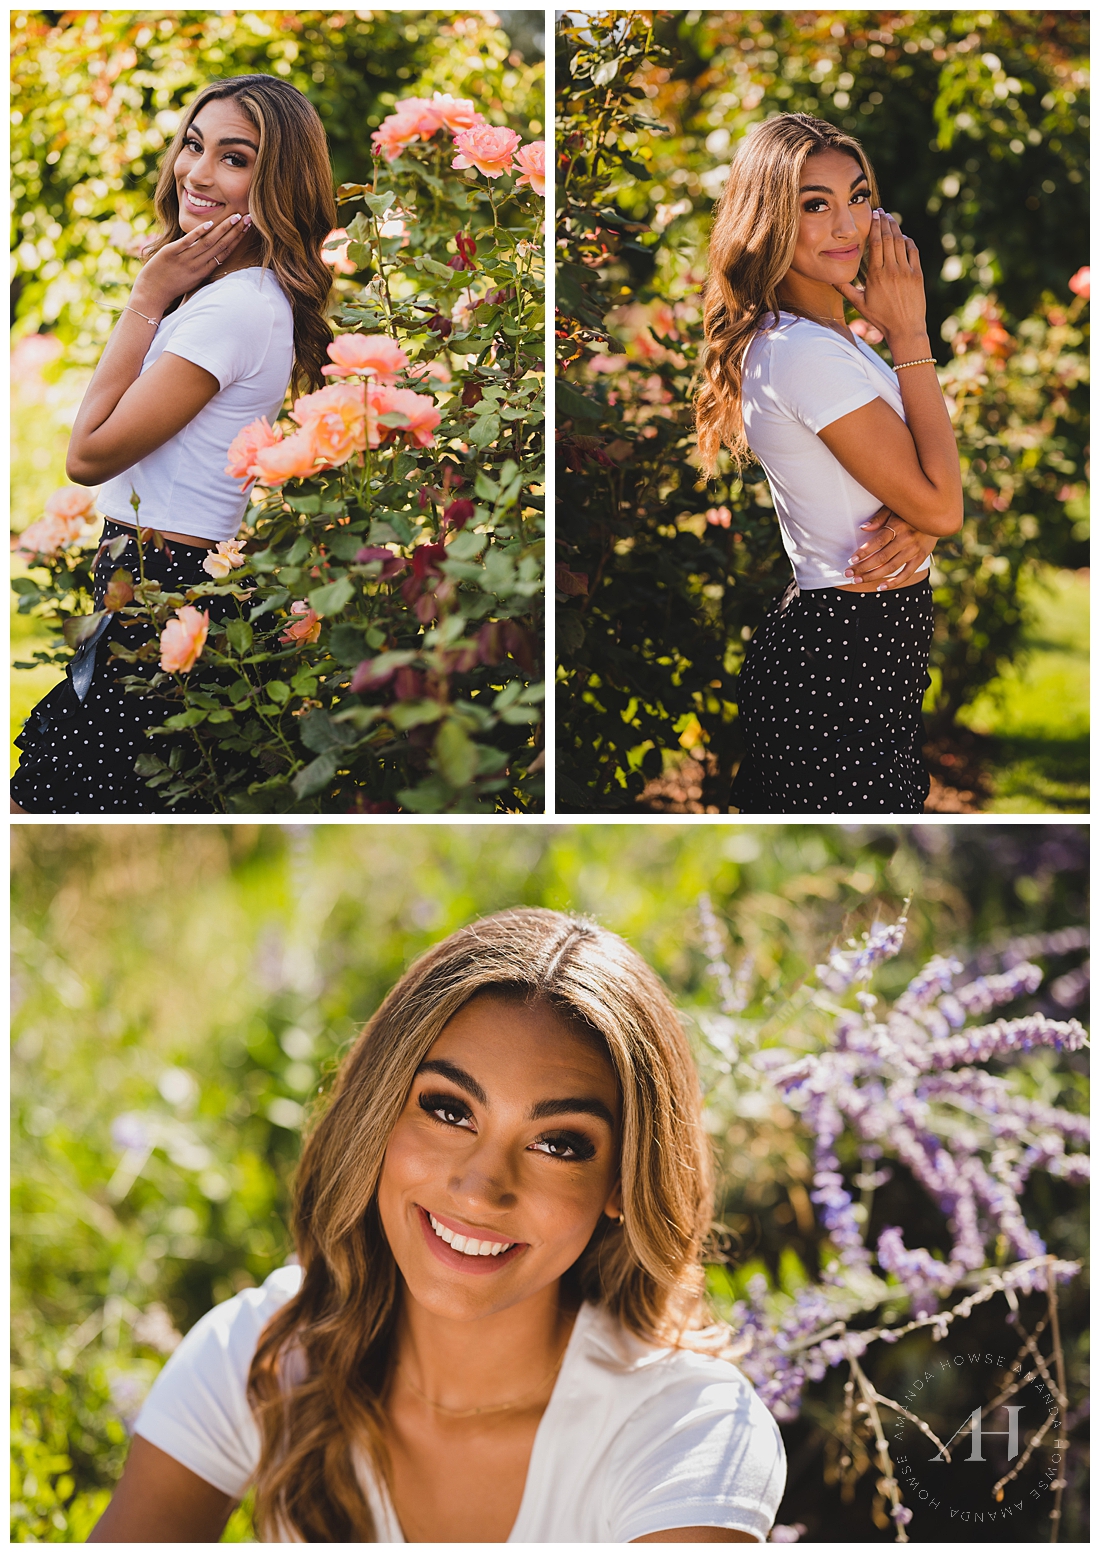 Black and White Skirt Ideas for Senior Portraits in a Garden | Point Defiance Rose Garden Portraits | Photographed by the Best Tacoma Senior Photographer Amanda Howse Photography